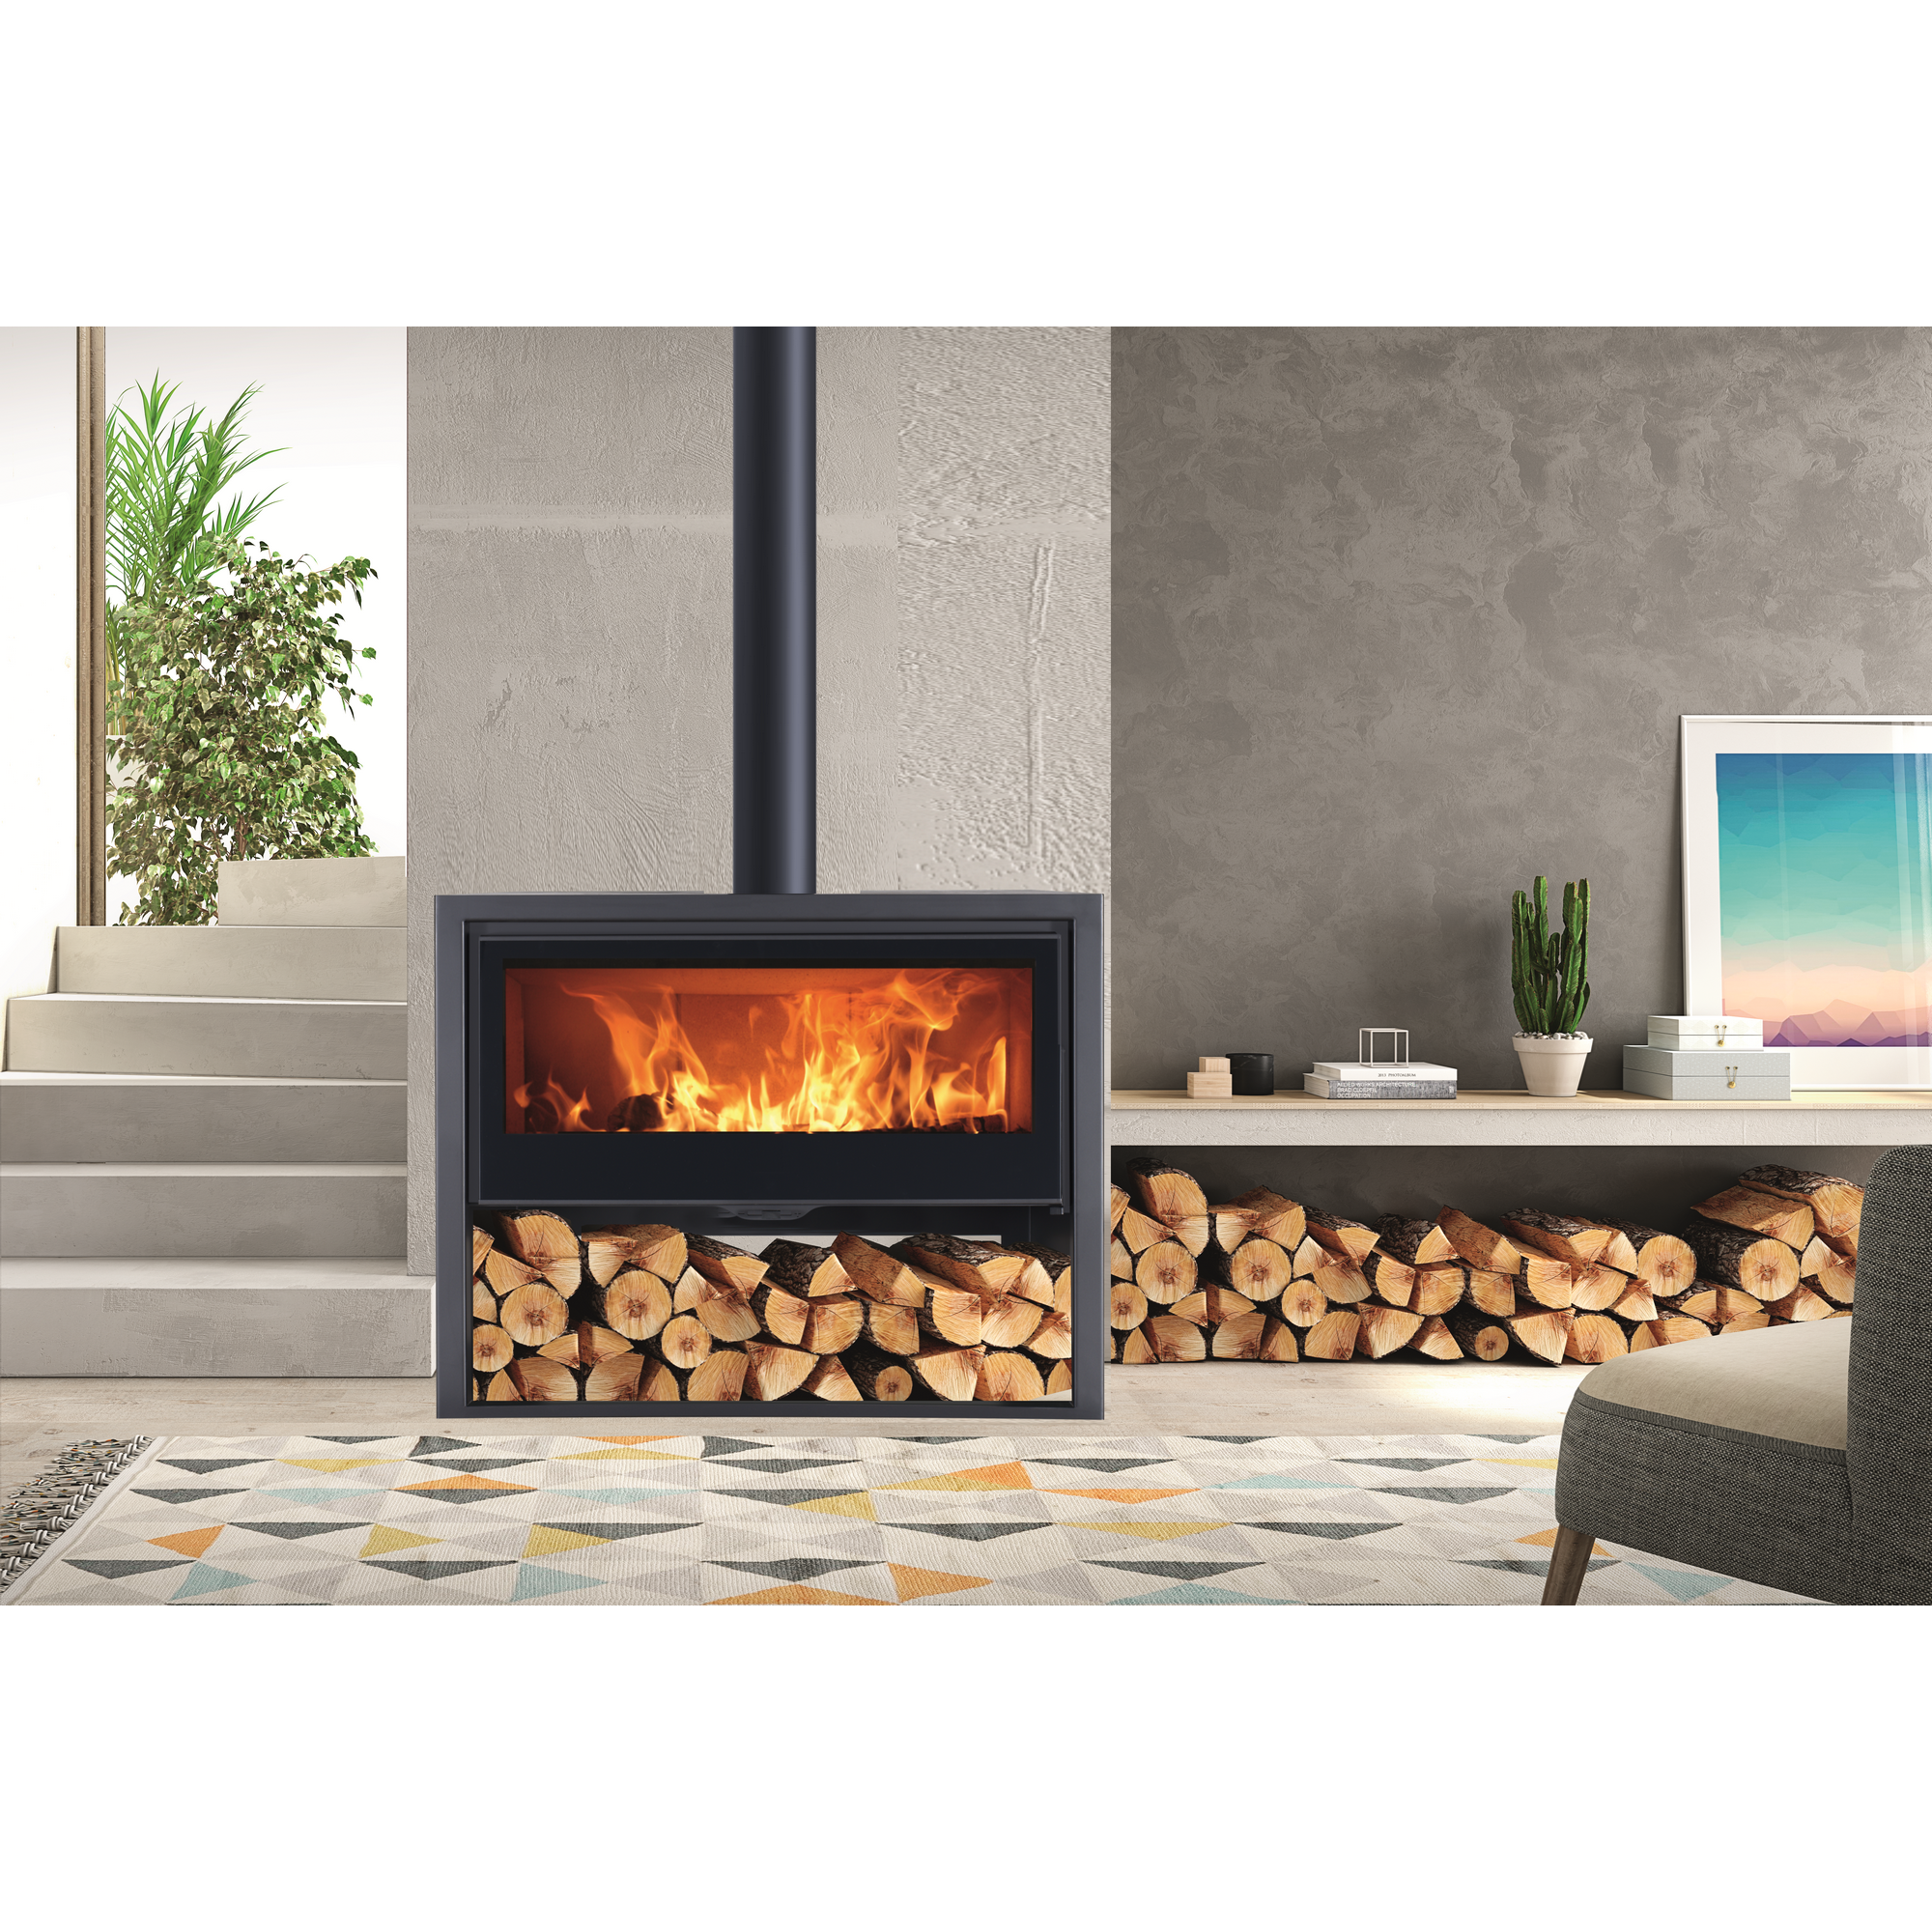 Kaminofen 'Chopin' Stahl 8,9 kW + product picture